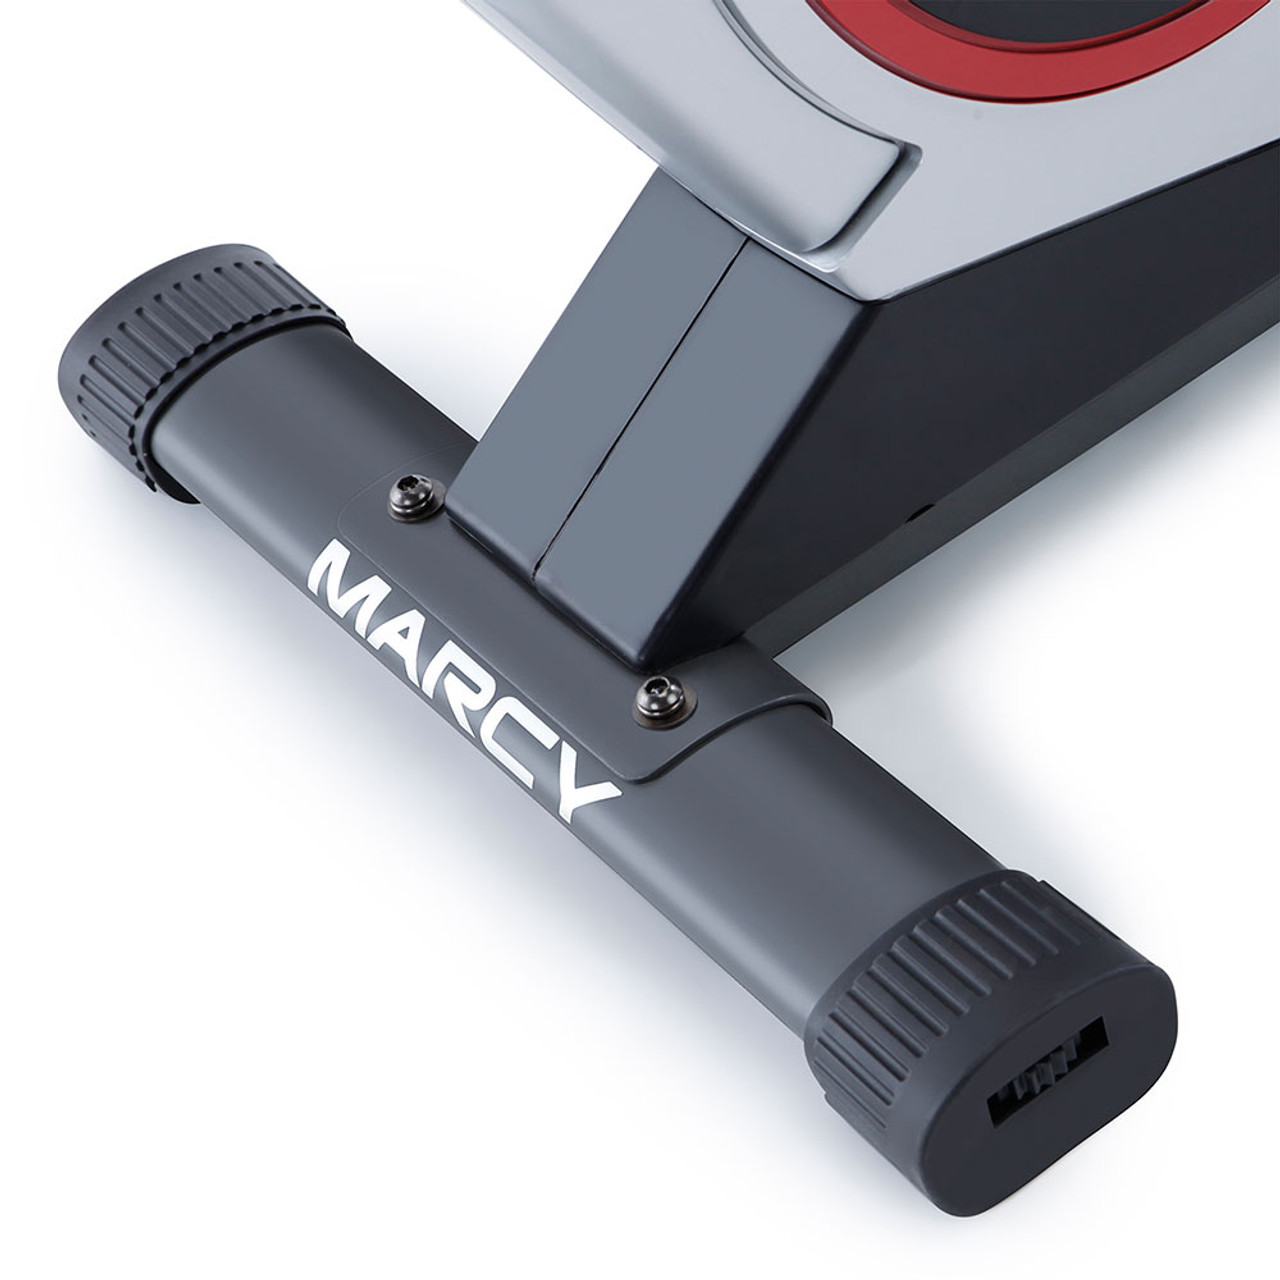 Regenerating Magnetic Upright Exercise Bike Marcy ME-702 has adjustable pads for sturdy balance